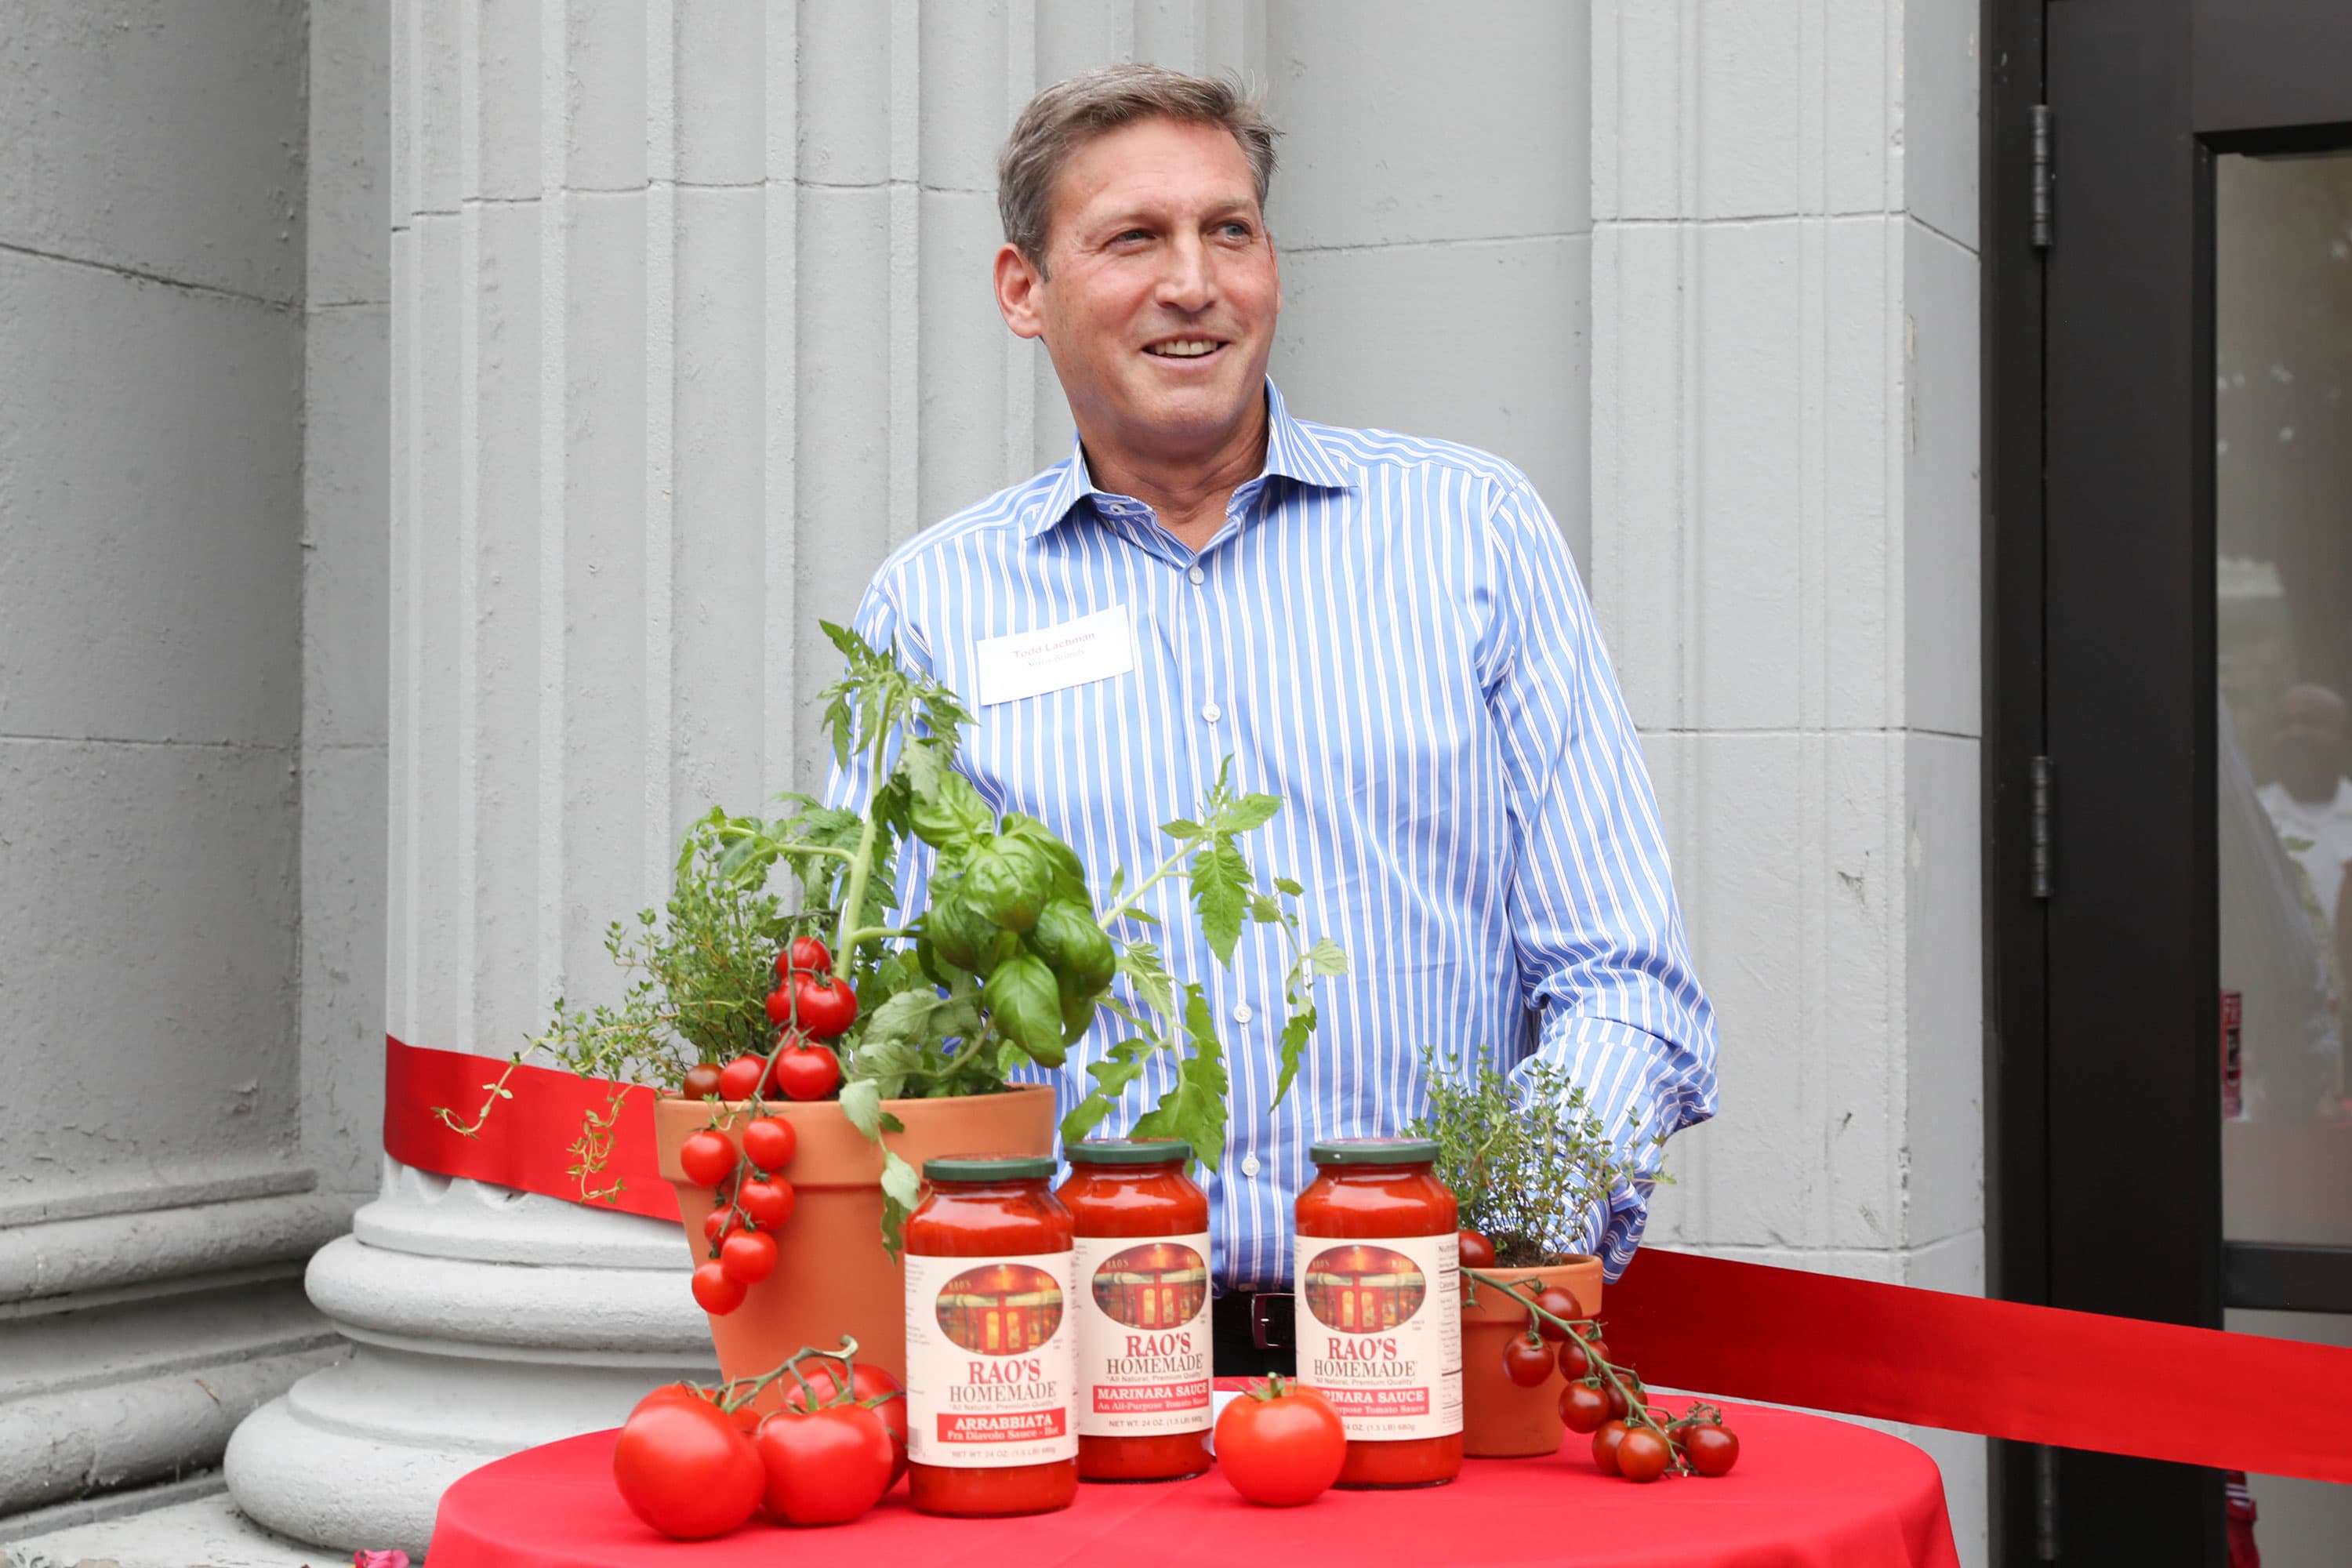 Needham says this premium pasta sauce company could rally more than 20%